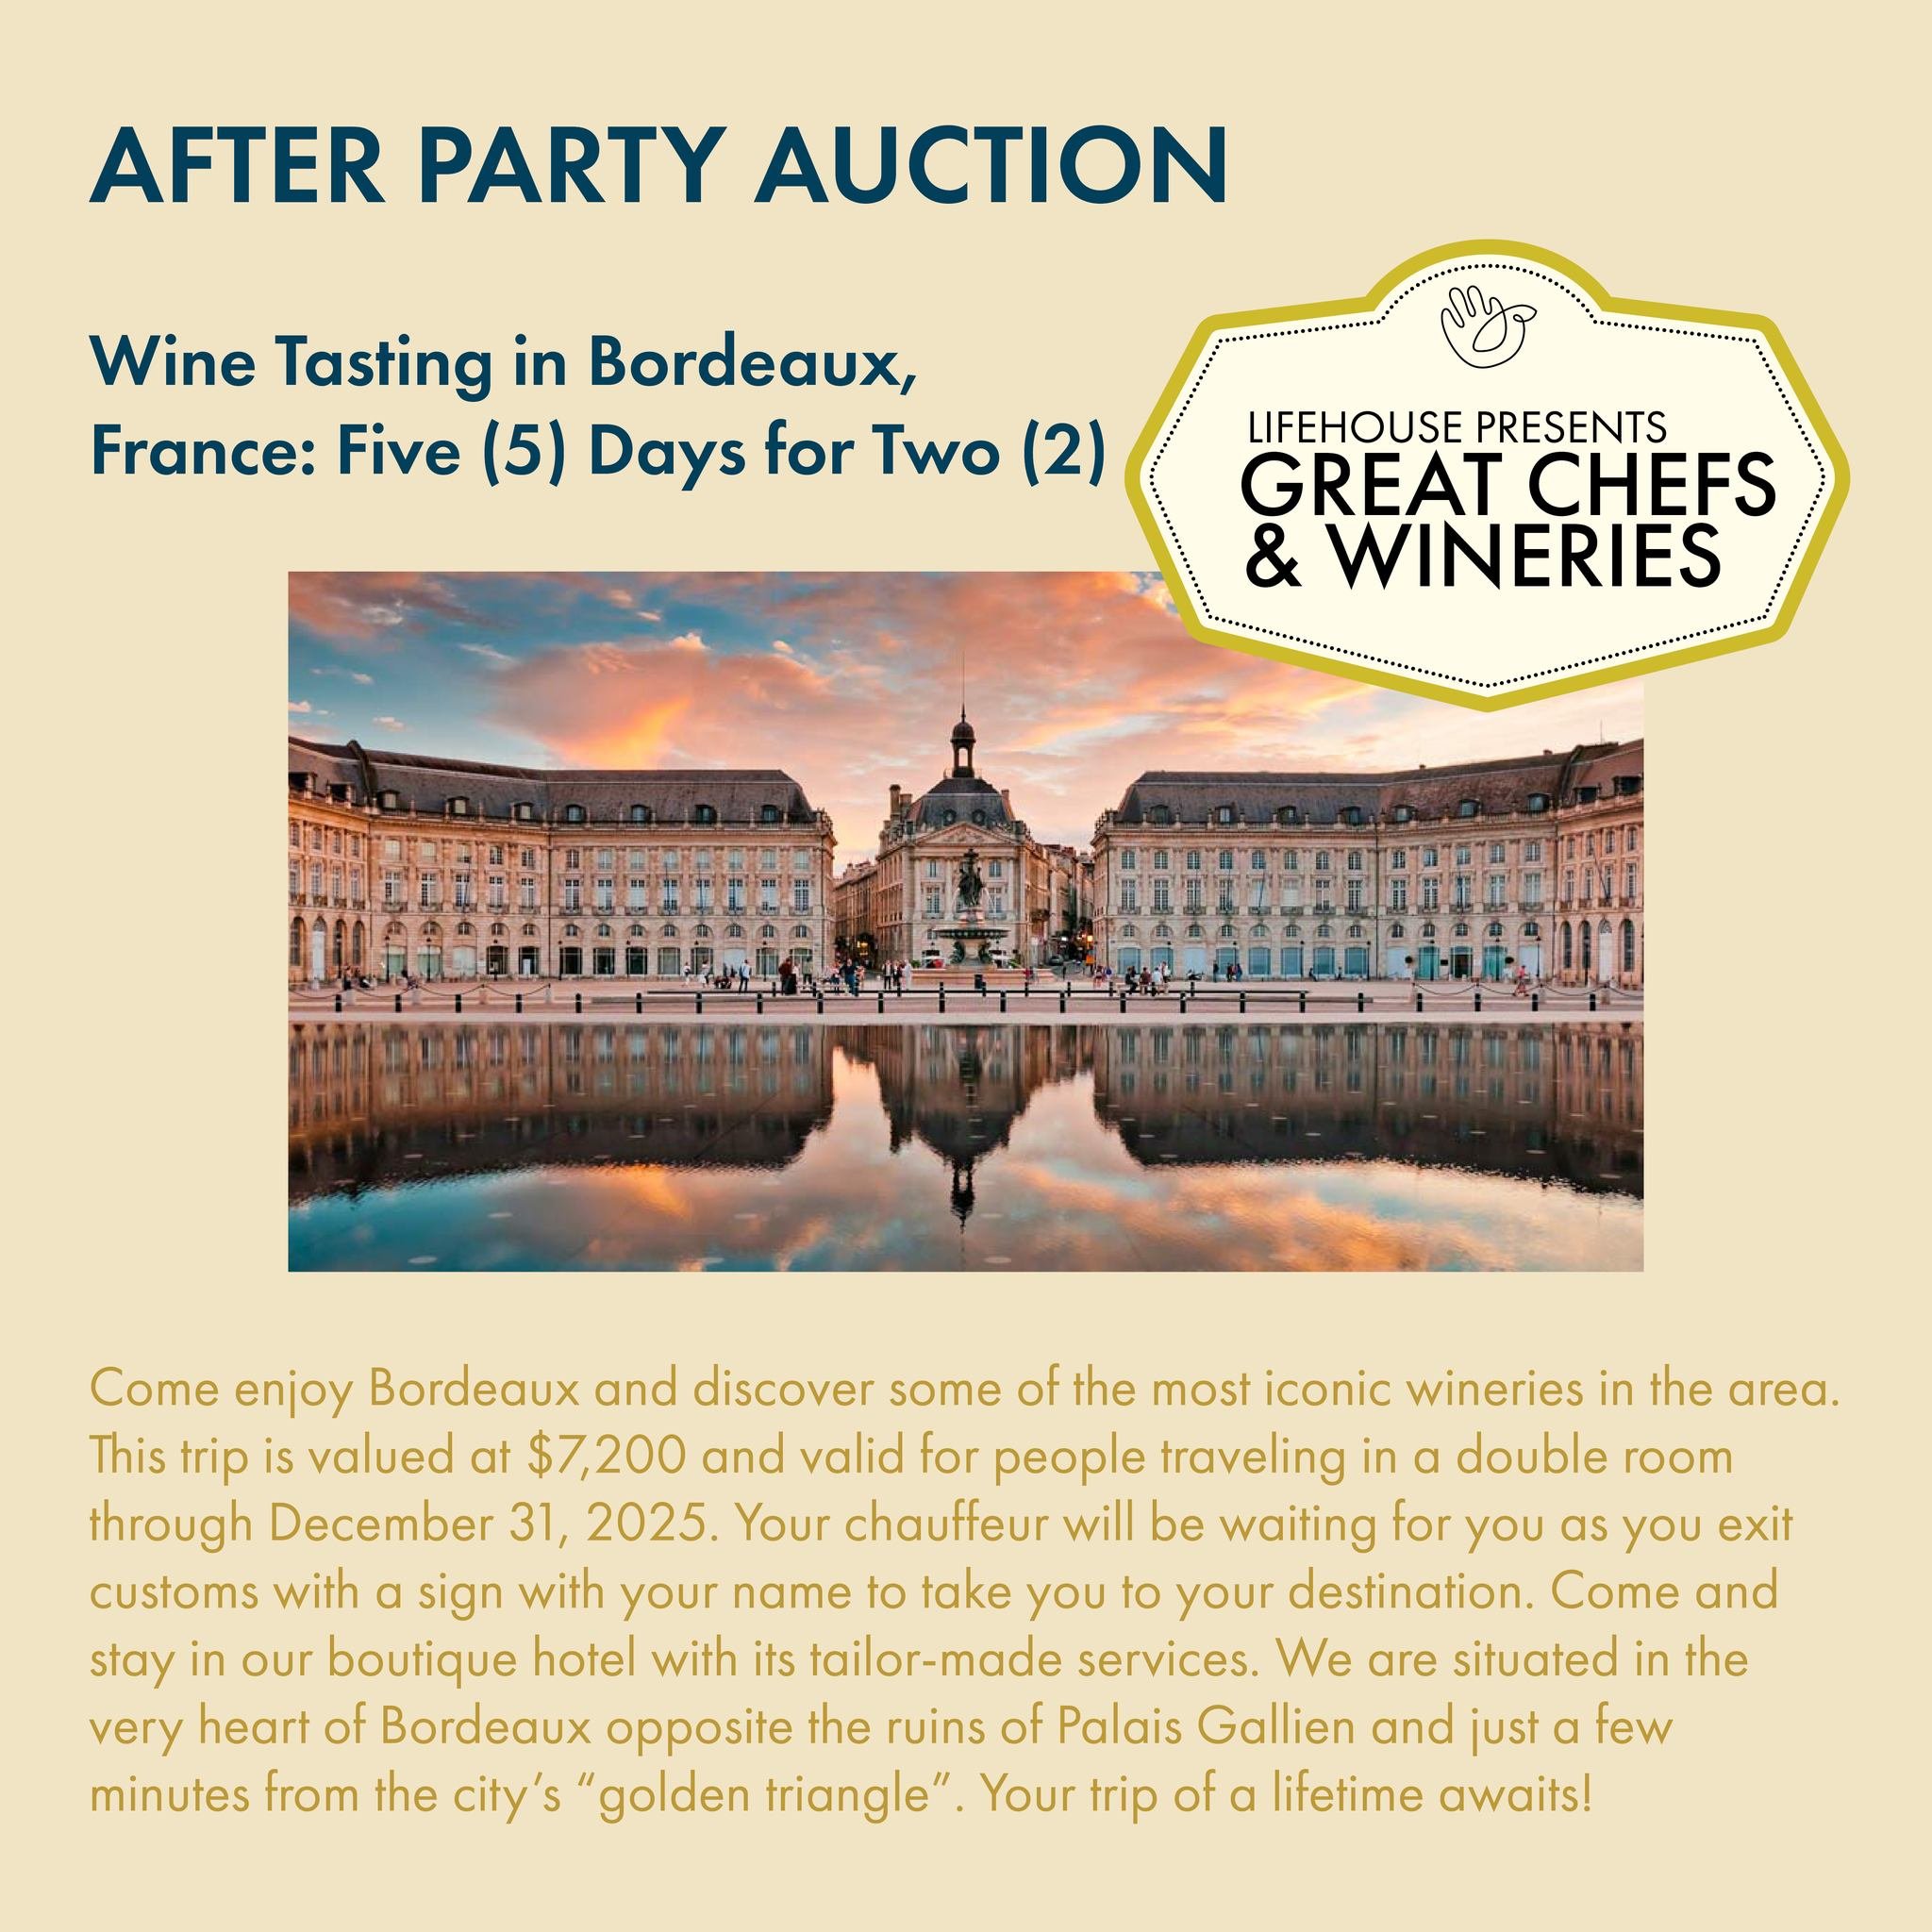 AFTER PARTY AUCTION IS HERE!� April 18- April 20 The 'After Party' auction has some amazing new luxury trips to offer and some items that you may have missed before.

We need your help now more than ever to ensure Lifehouse is able to continue provid